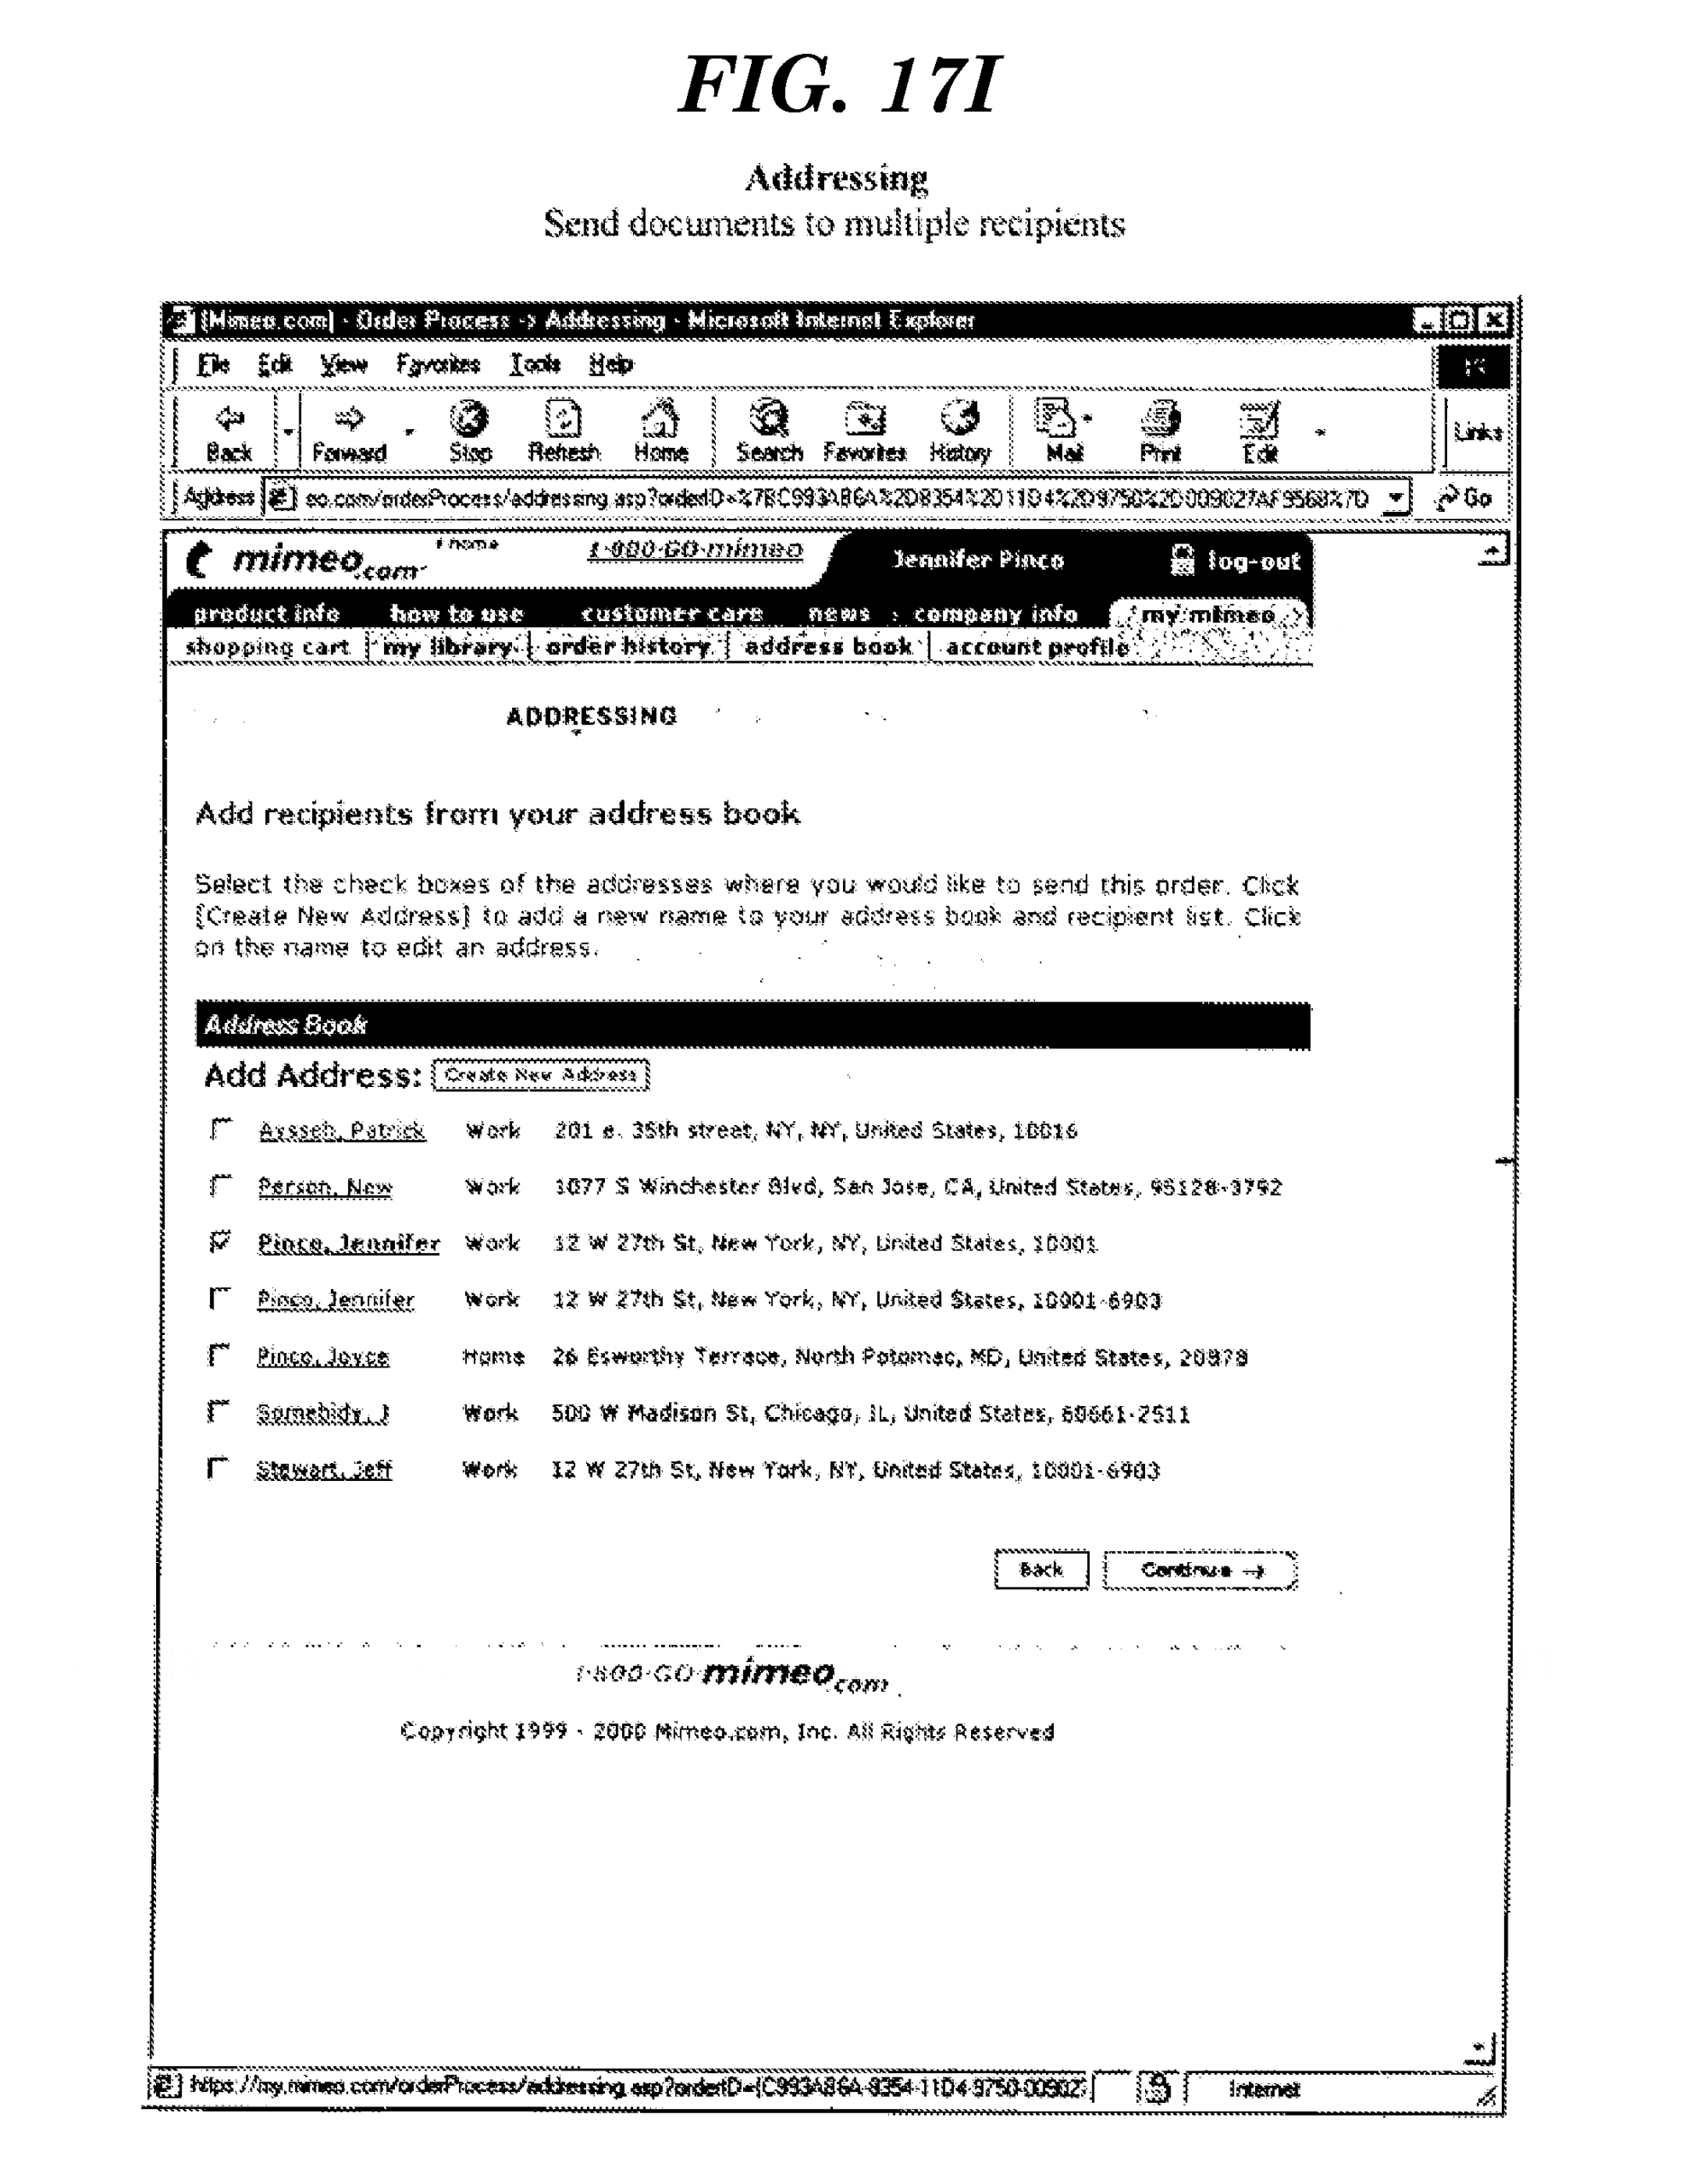 Screenshot from Mimeo Patent enabling users to ship documents to multiple locations. 